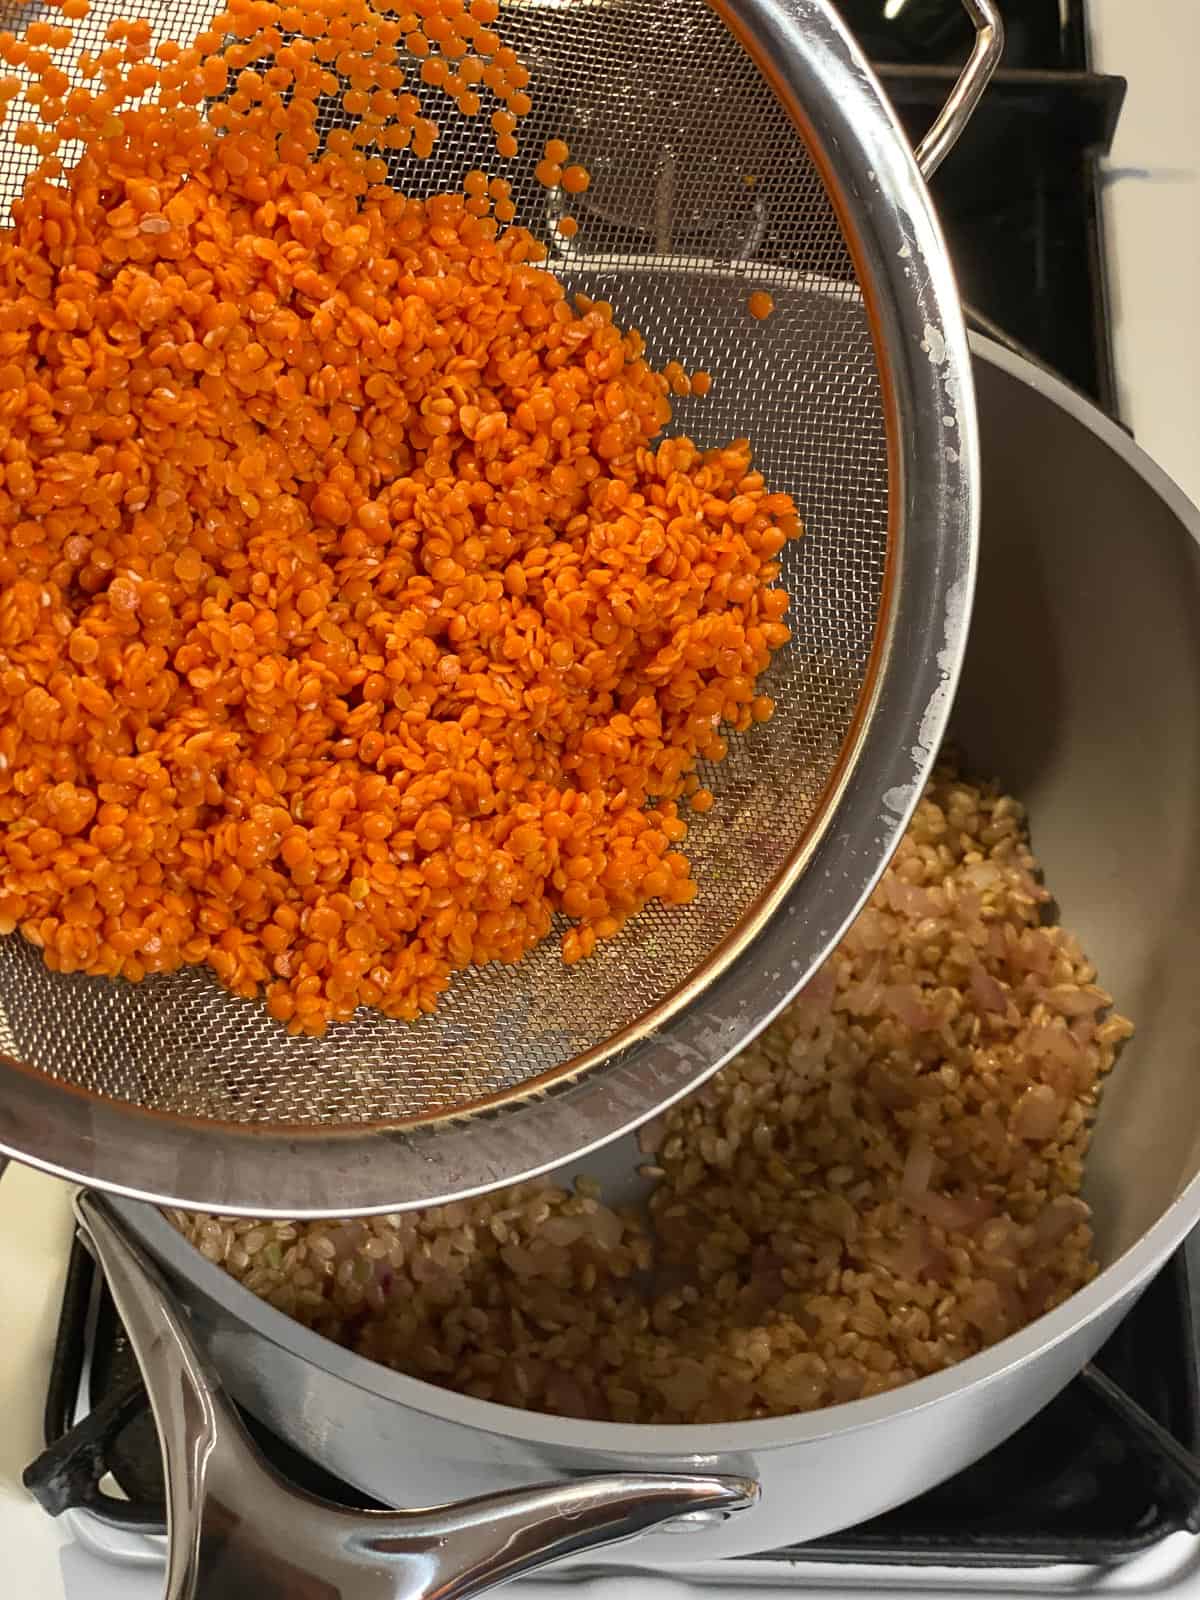 Process of adding lentils to the bowl